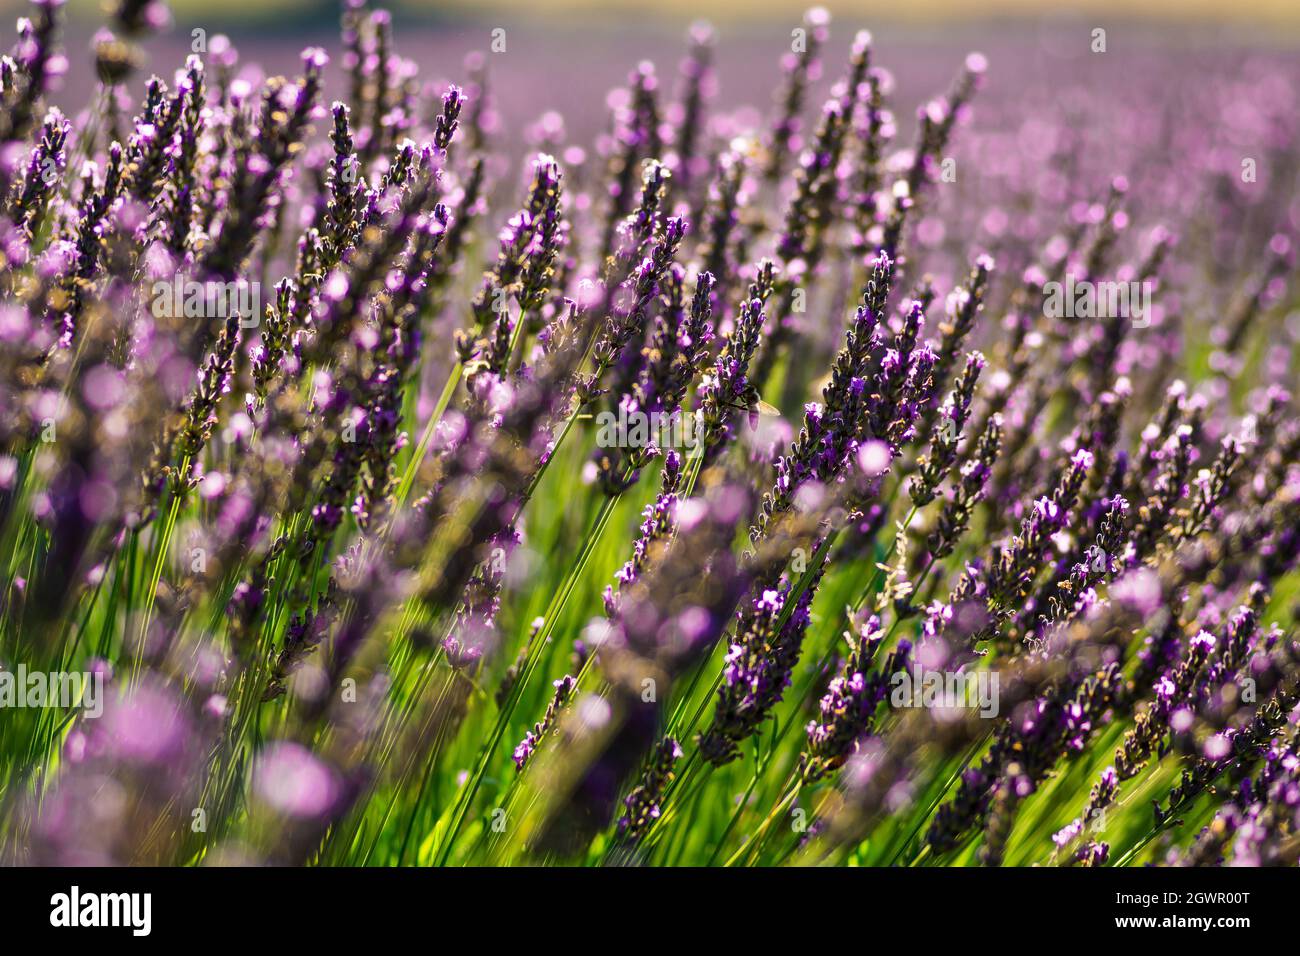 Italy, July 2021 - Wonderful And Relaxing View Of A Lavender Field With Its Purple Flowers Stock Photo